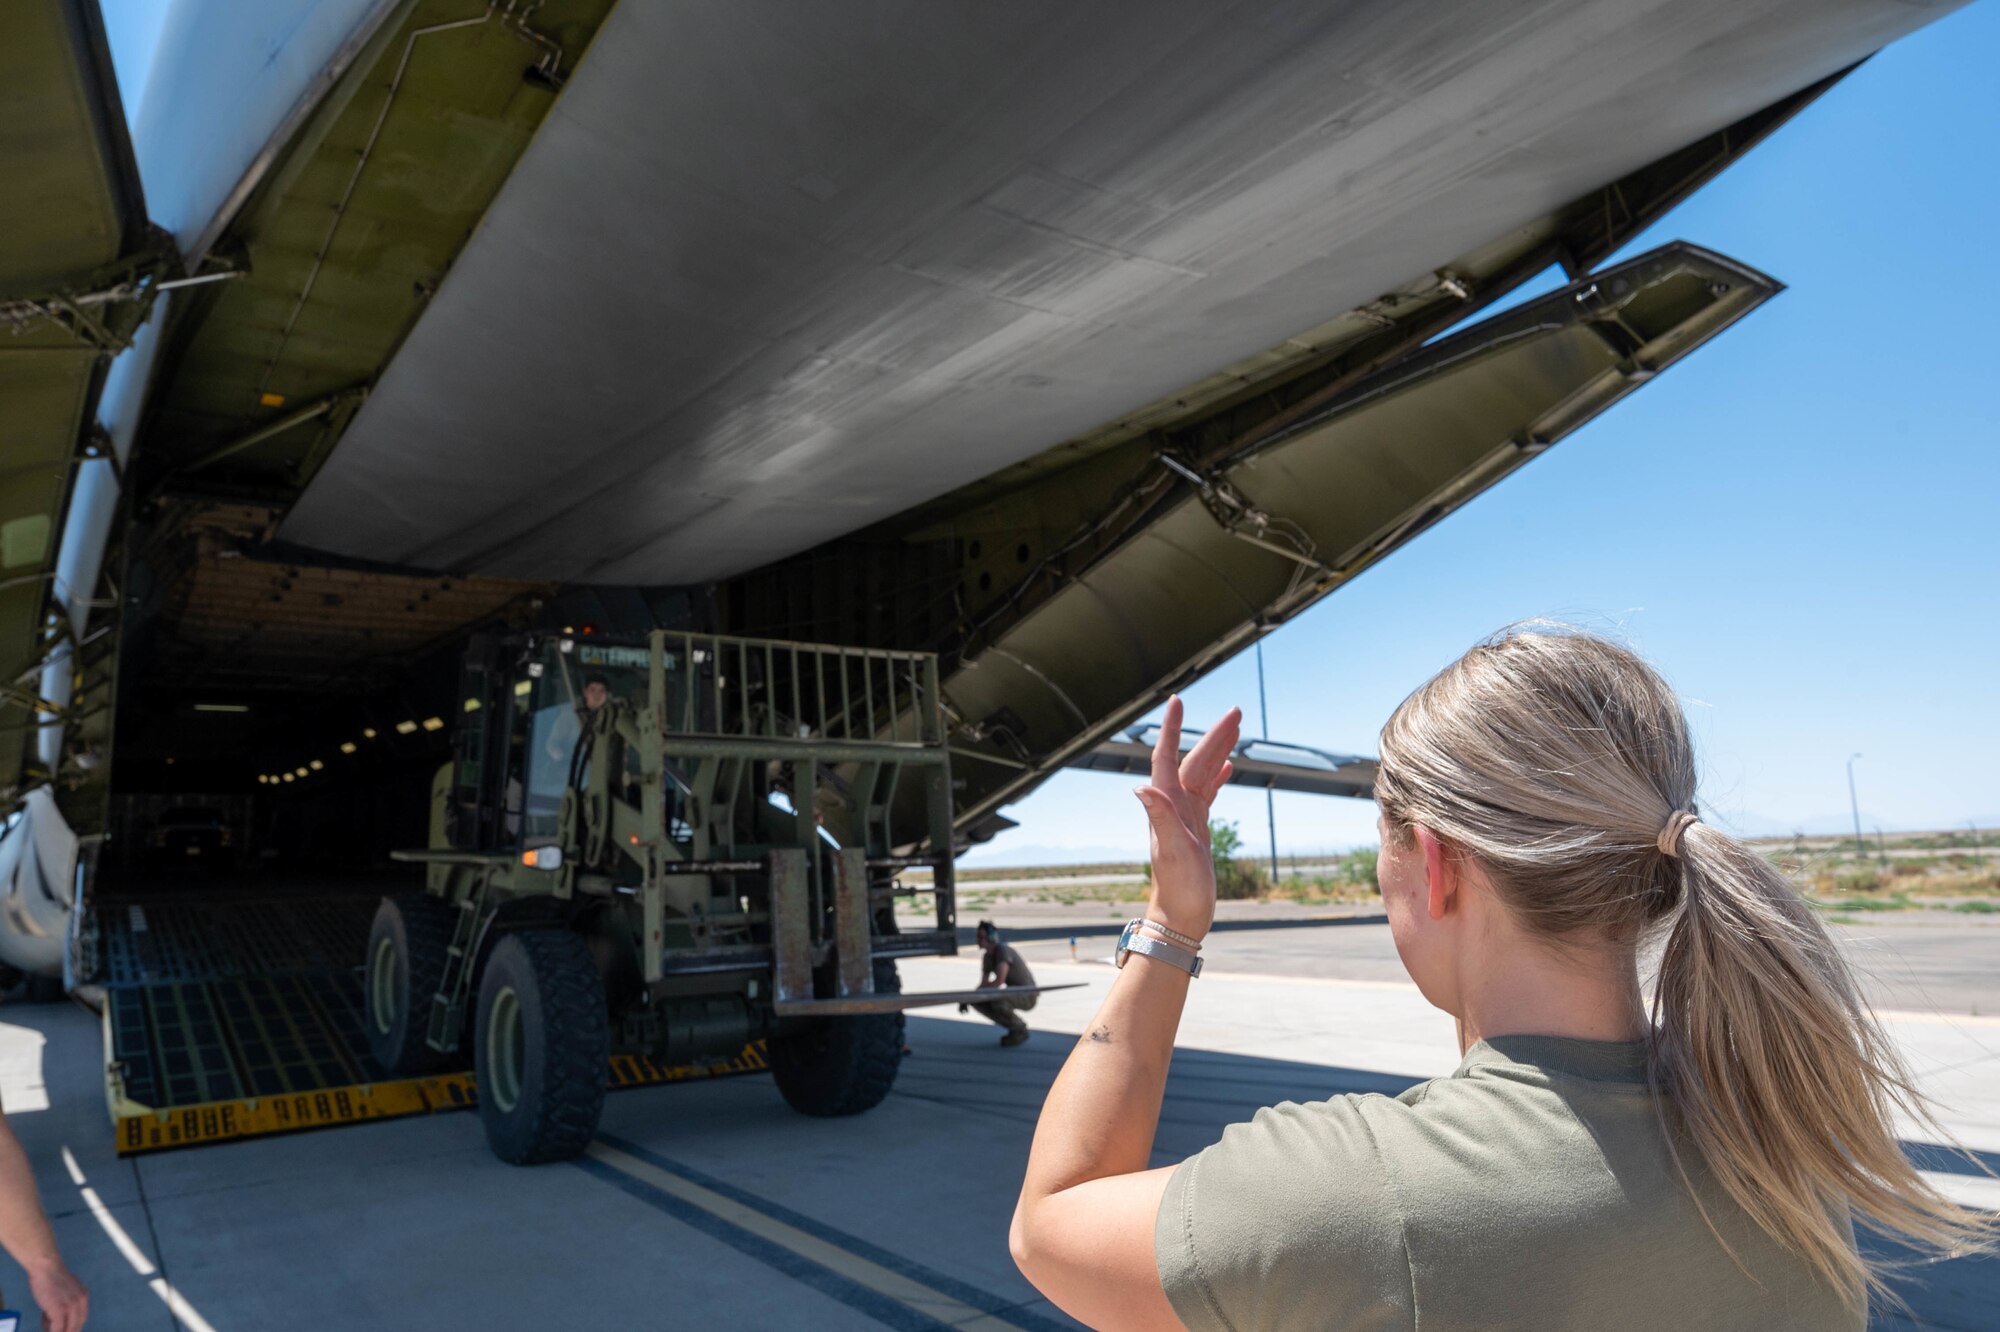 Airman 1st Class Rebecca Reimer, 9th Airlift Squadron loadmaster student, marshals a forklift tractor off the ramp of a Dover Air Force Base C-5M Super Galaxy during a Major Command Service Tail Trainer at Holloman AFB, New Mexico, June 7, 2021. Following an initiative from Air Mobility Command, MSTTs have been in the training plan of the 9th AS since early 2021 to expedite upgrade and qualification training for C-5M Super Galaxy loadmasters and flight engineers. This MSTT was coordinated in partnership with Air Education Training Command’s 49th Wing and Air Force Materiel Command’s 635th Materiel Maintenance Group. (U.S. Air Force photo by Senior Airman Faith Schaefer)